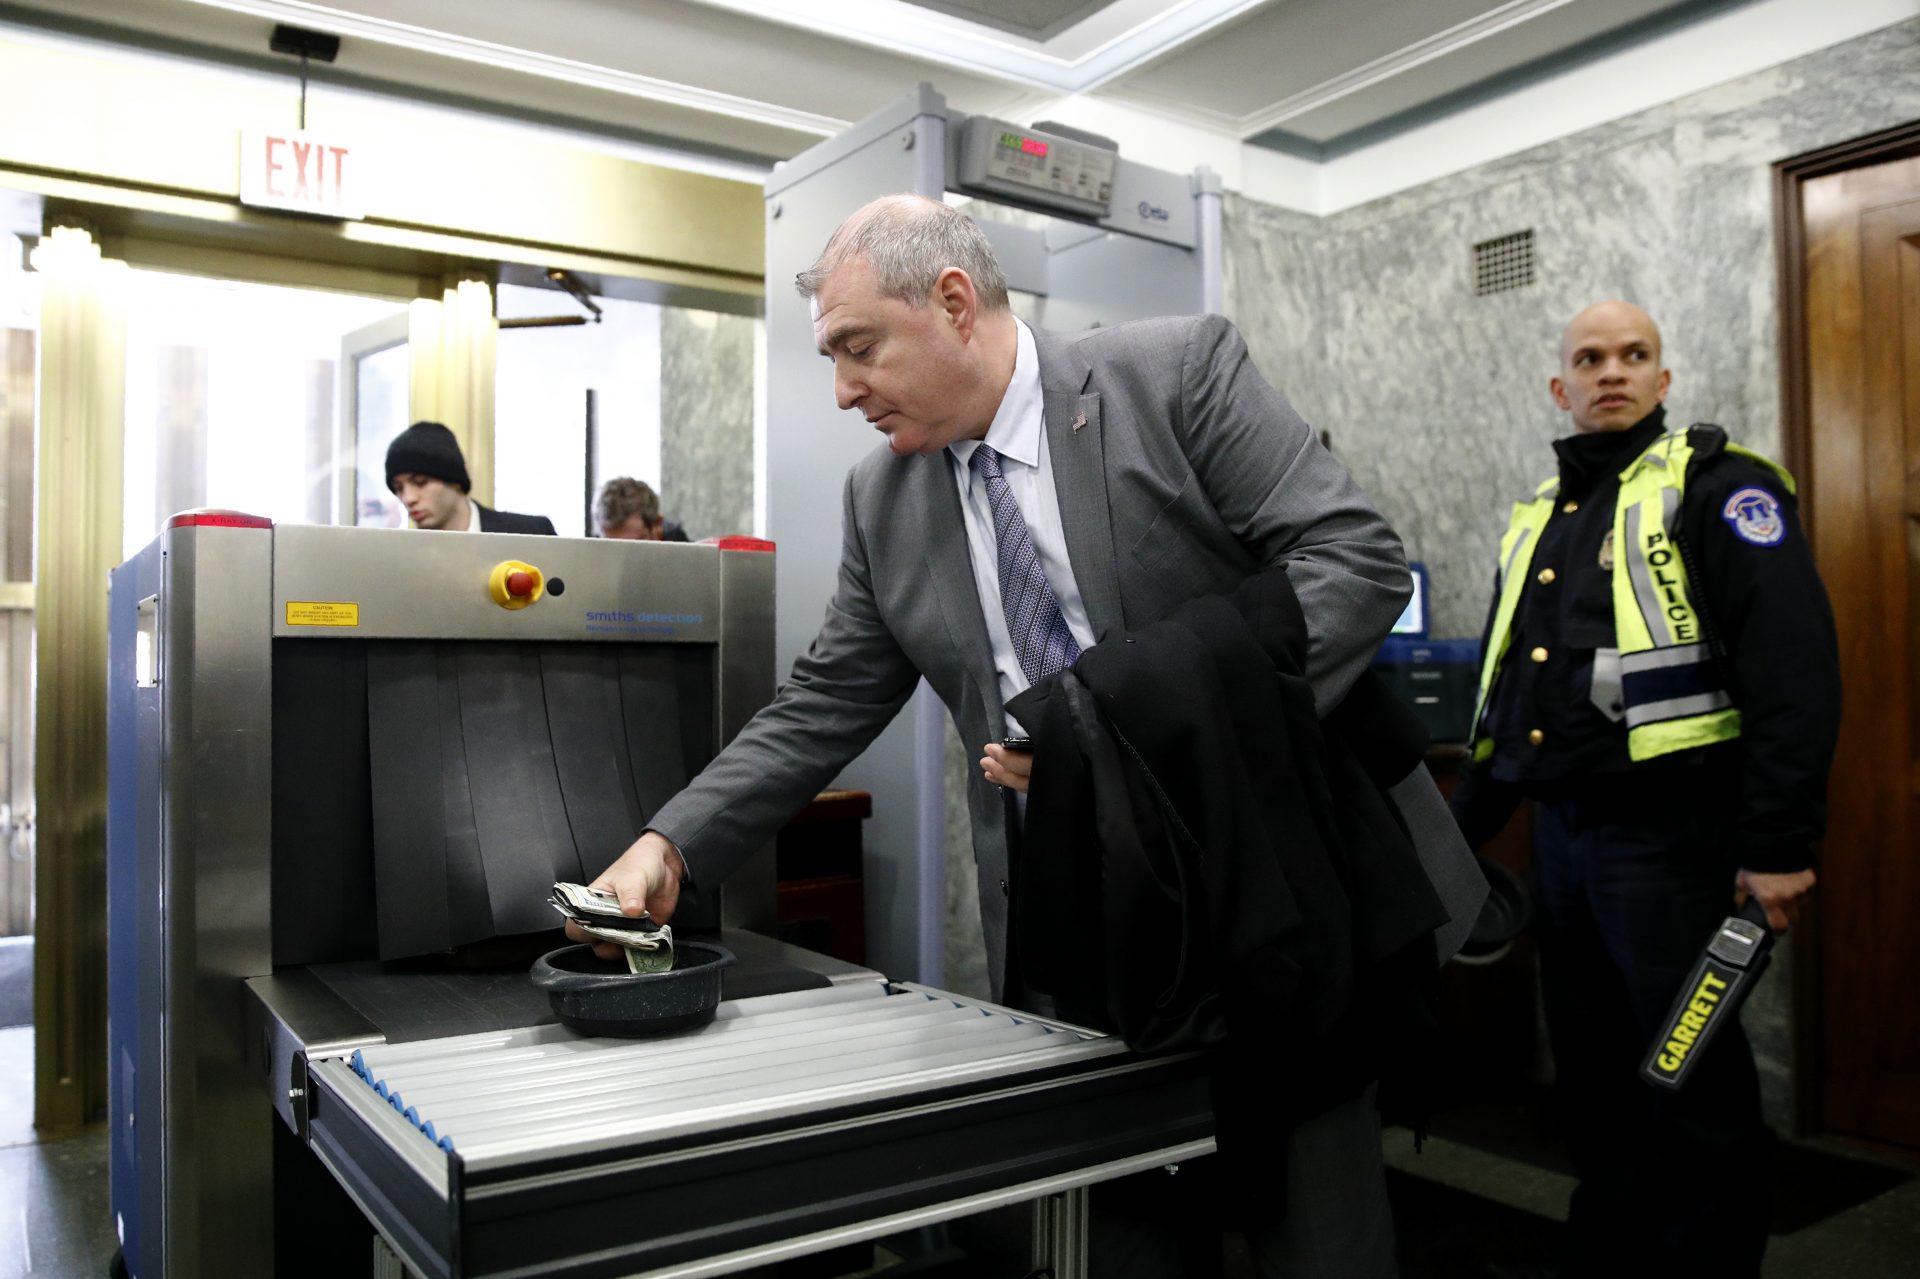 Lev Parnas, a Rudy Giuliani associate with ties to Ukraine, collects his belongings after going through a security checkpoint during the impeachment trial of President Trump on Wednesday.